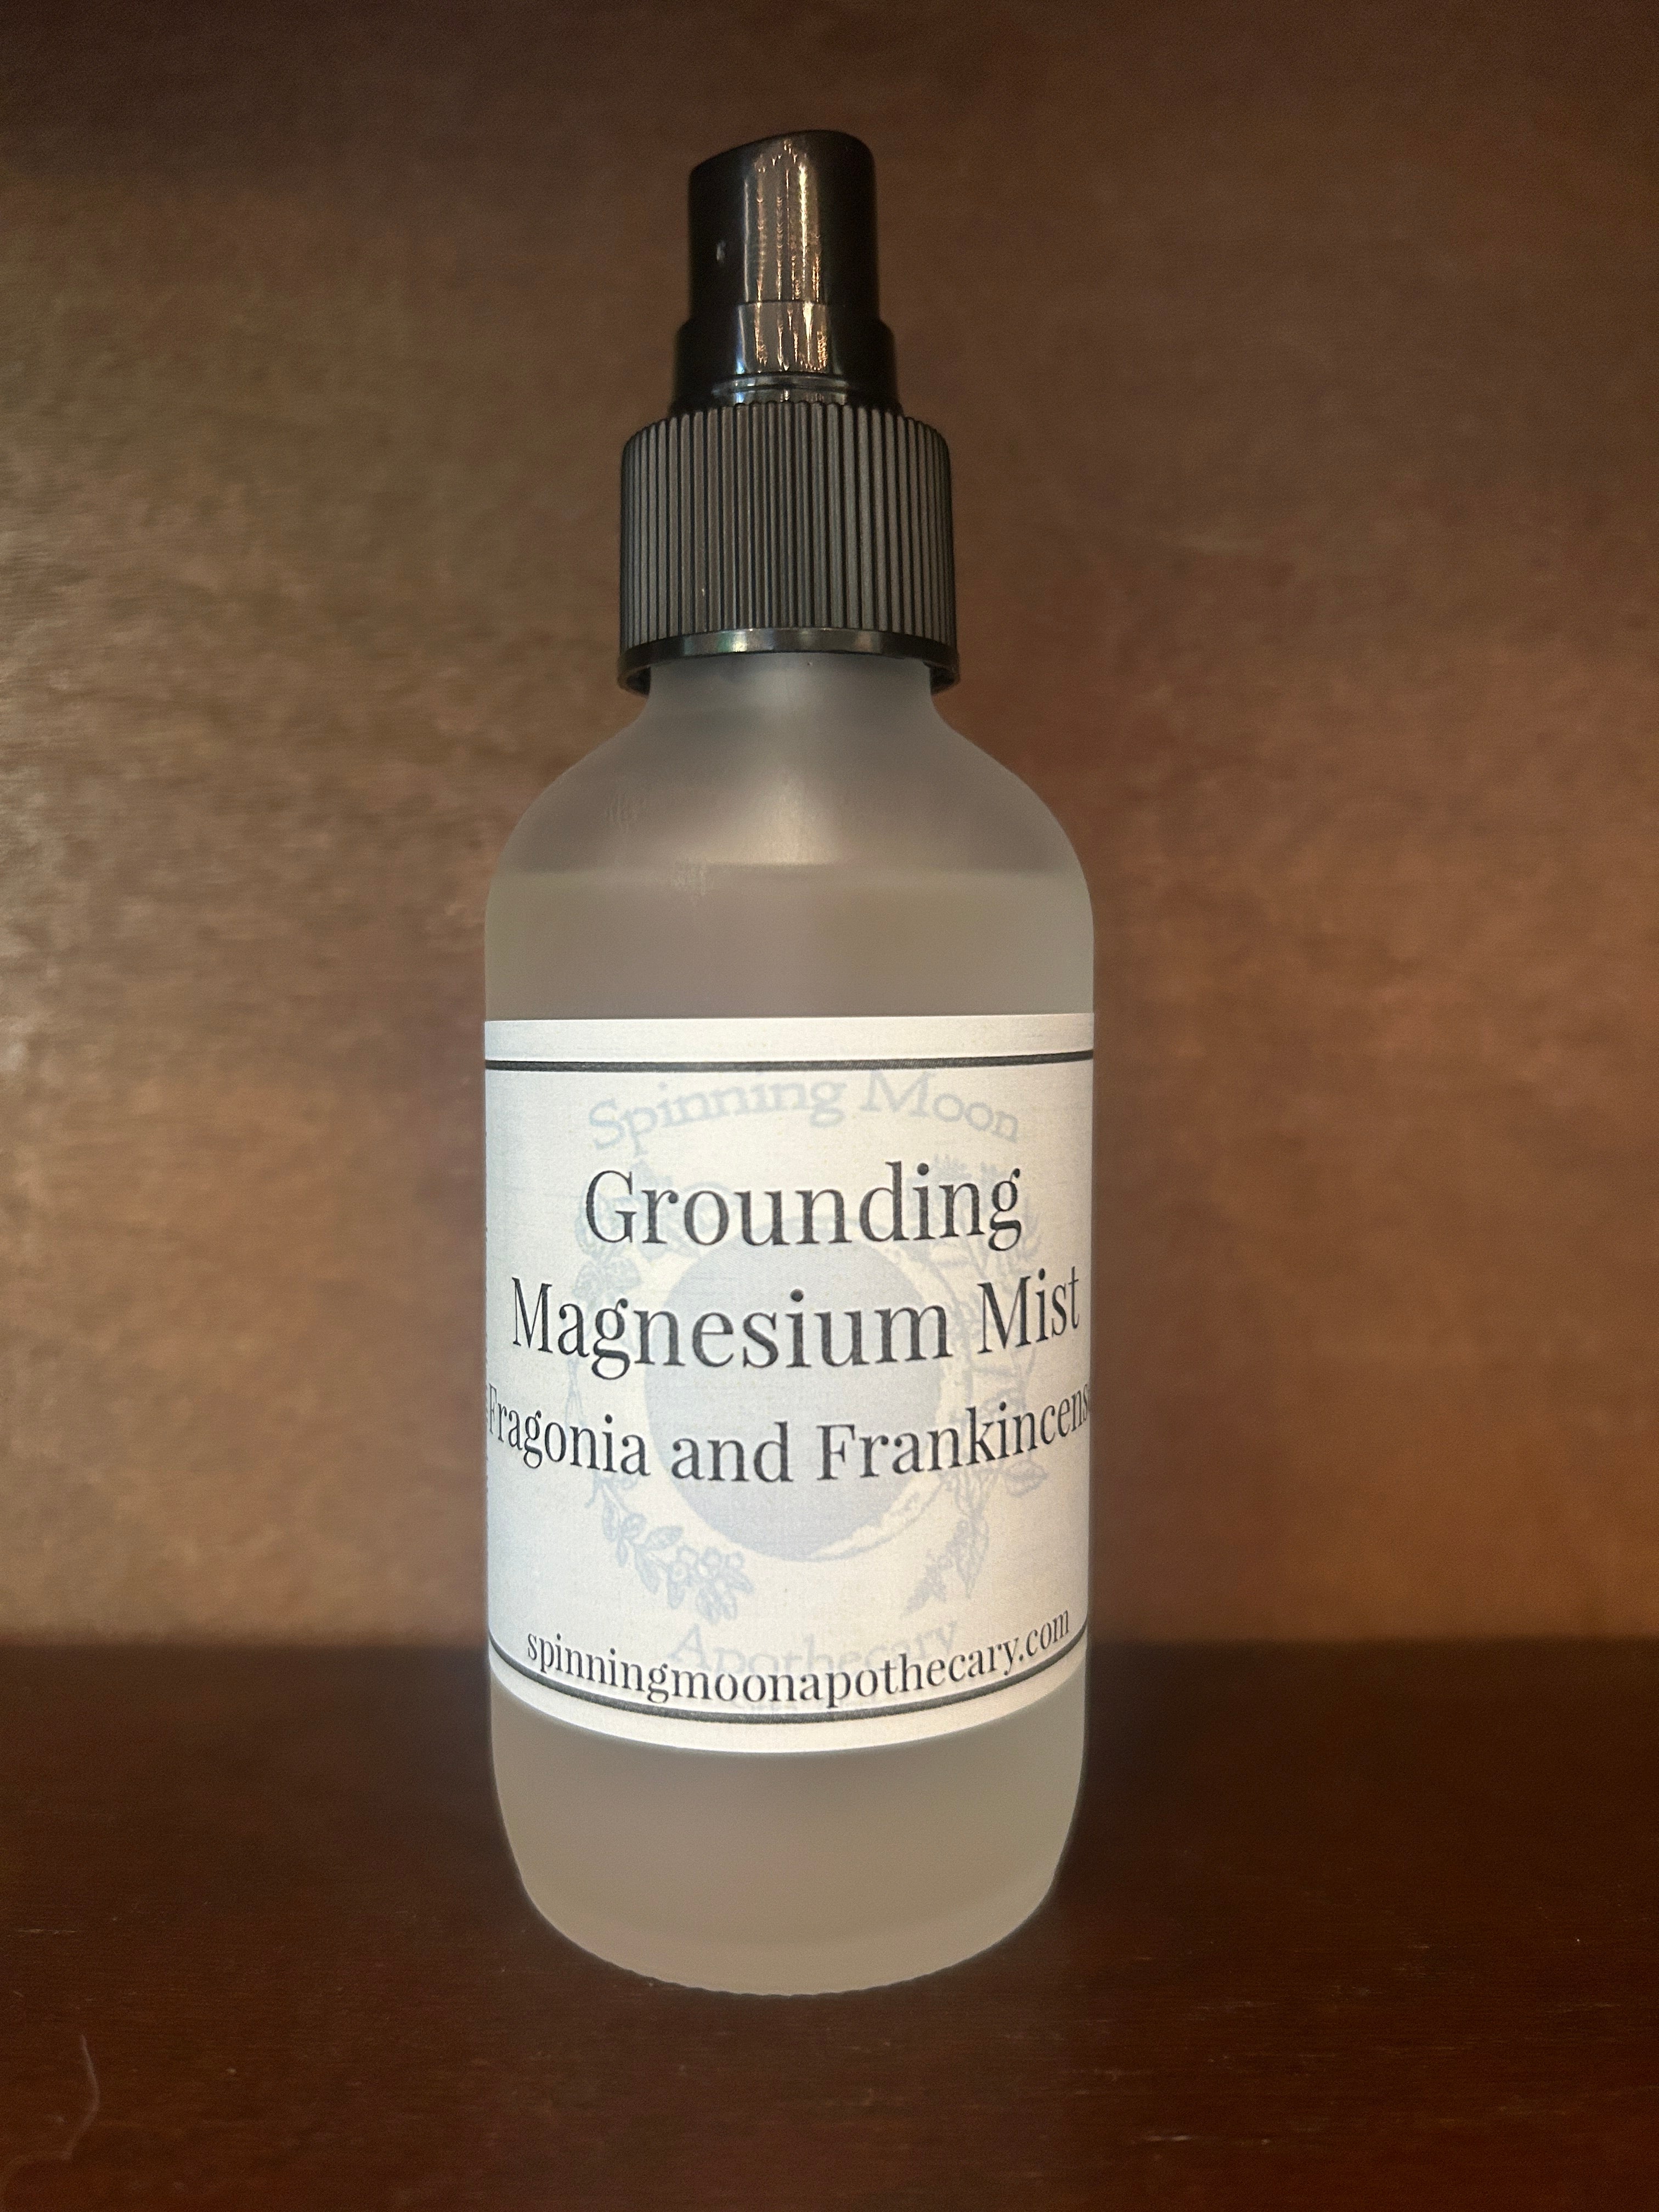 Grounding Magnesium Mist -- Fragonia and Frankincense